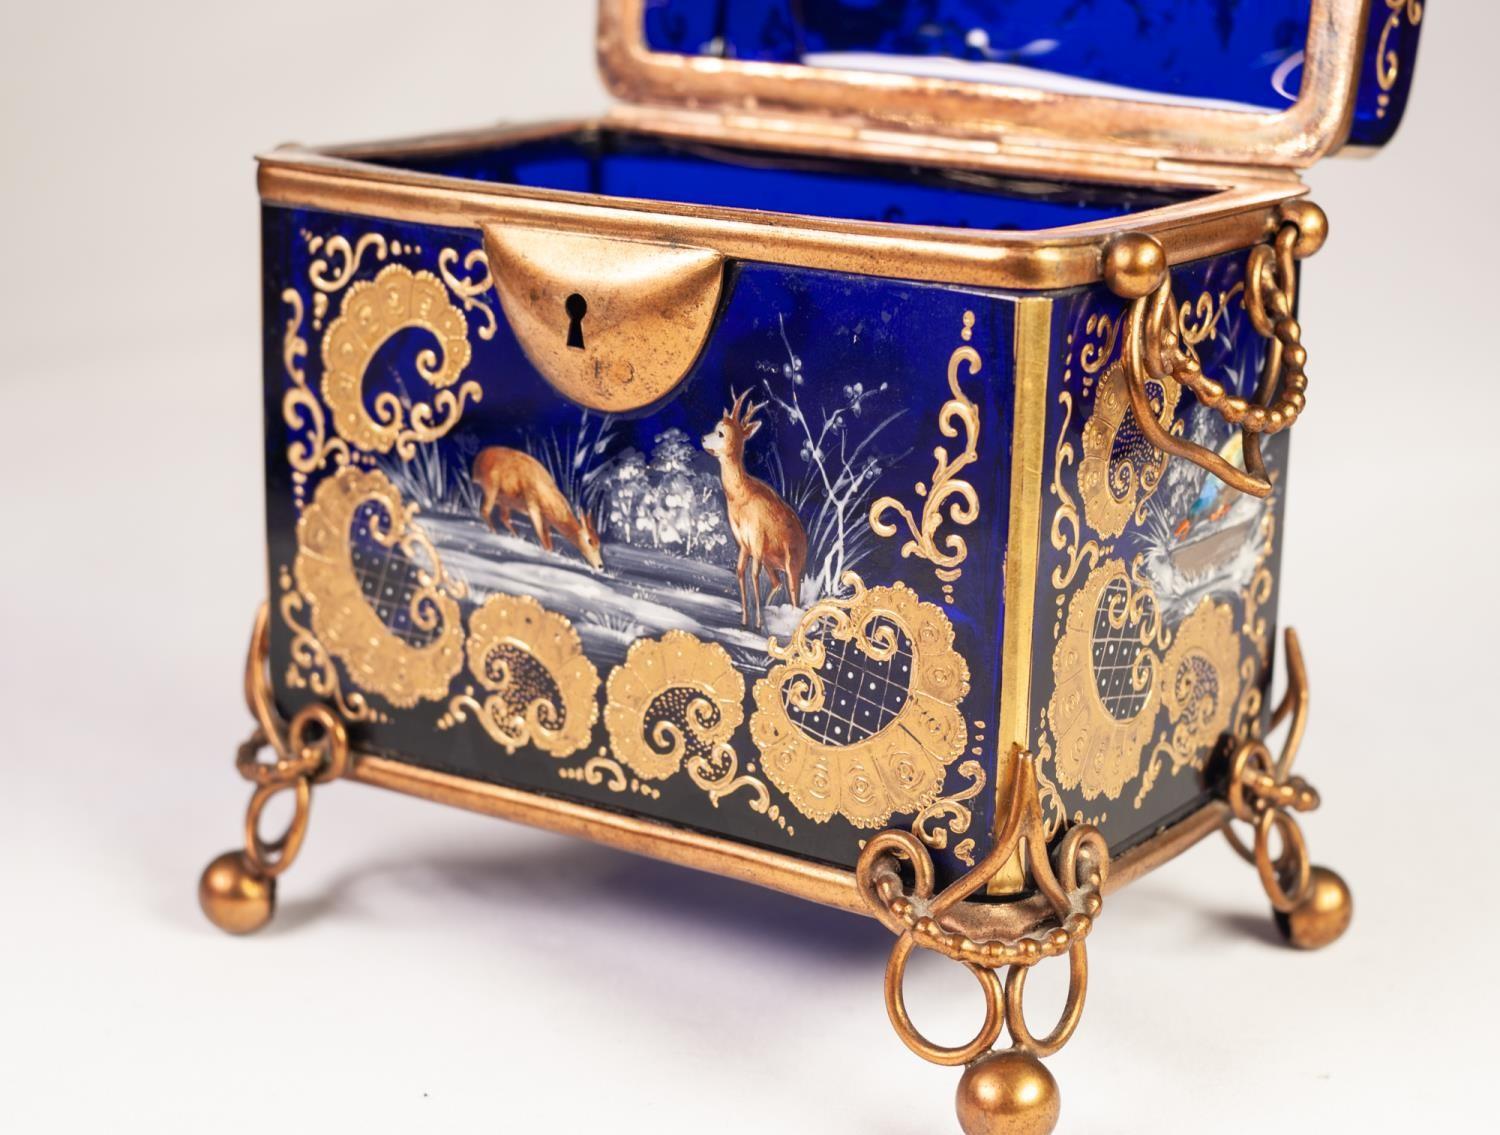 MOSER STYLE LATE NINETEENTH CENTURY ENAMELLED AND GILT METAL MOUNTED COBALT BLUE GLASS CASKET, of - Image 8 of 10